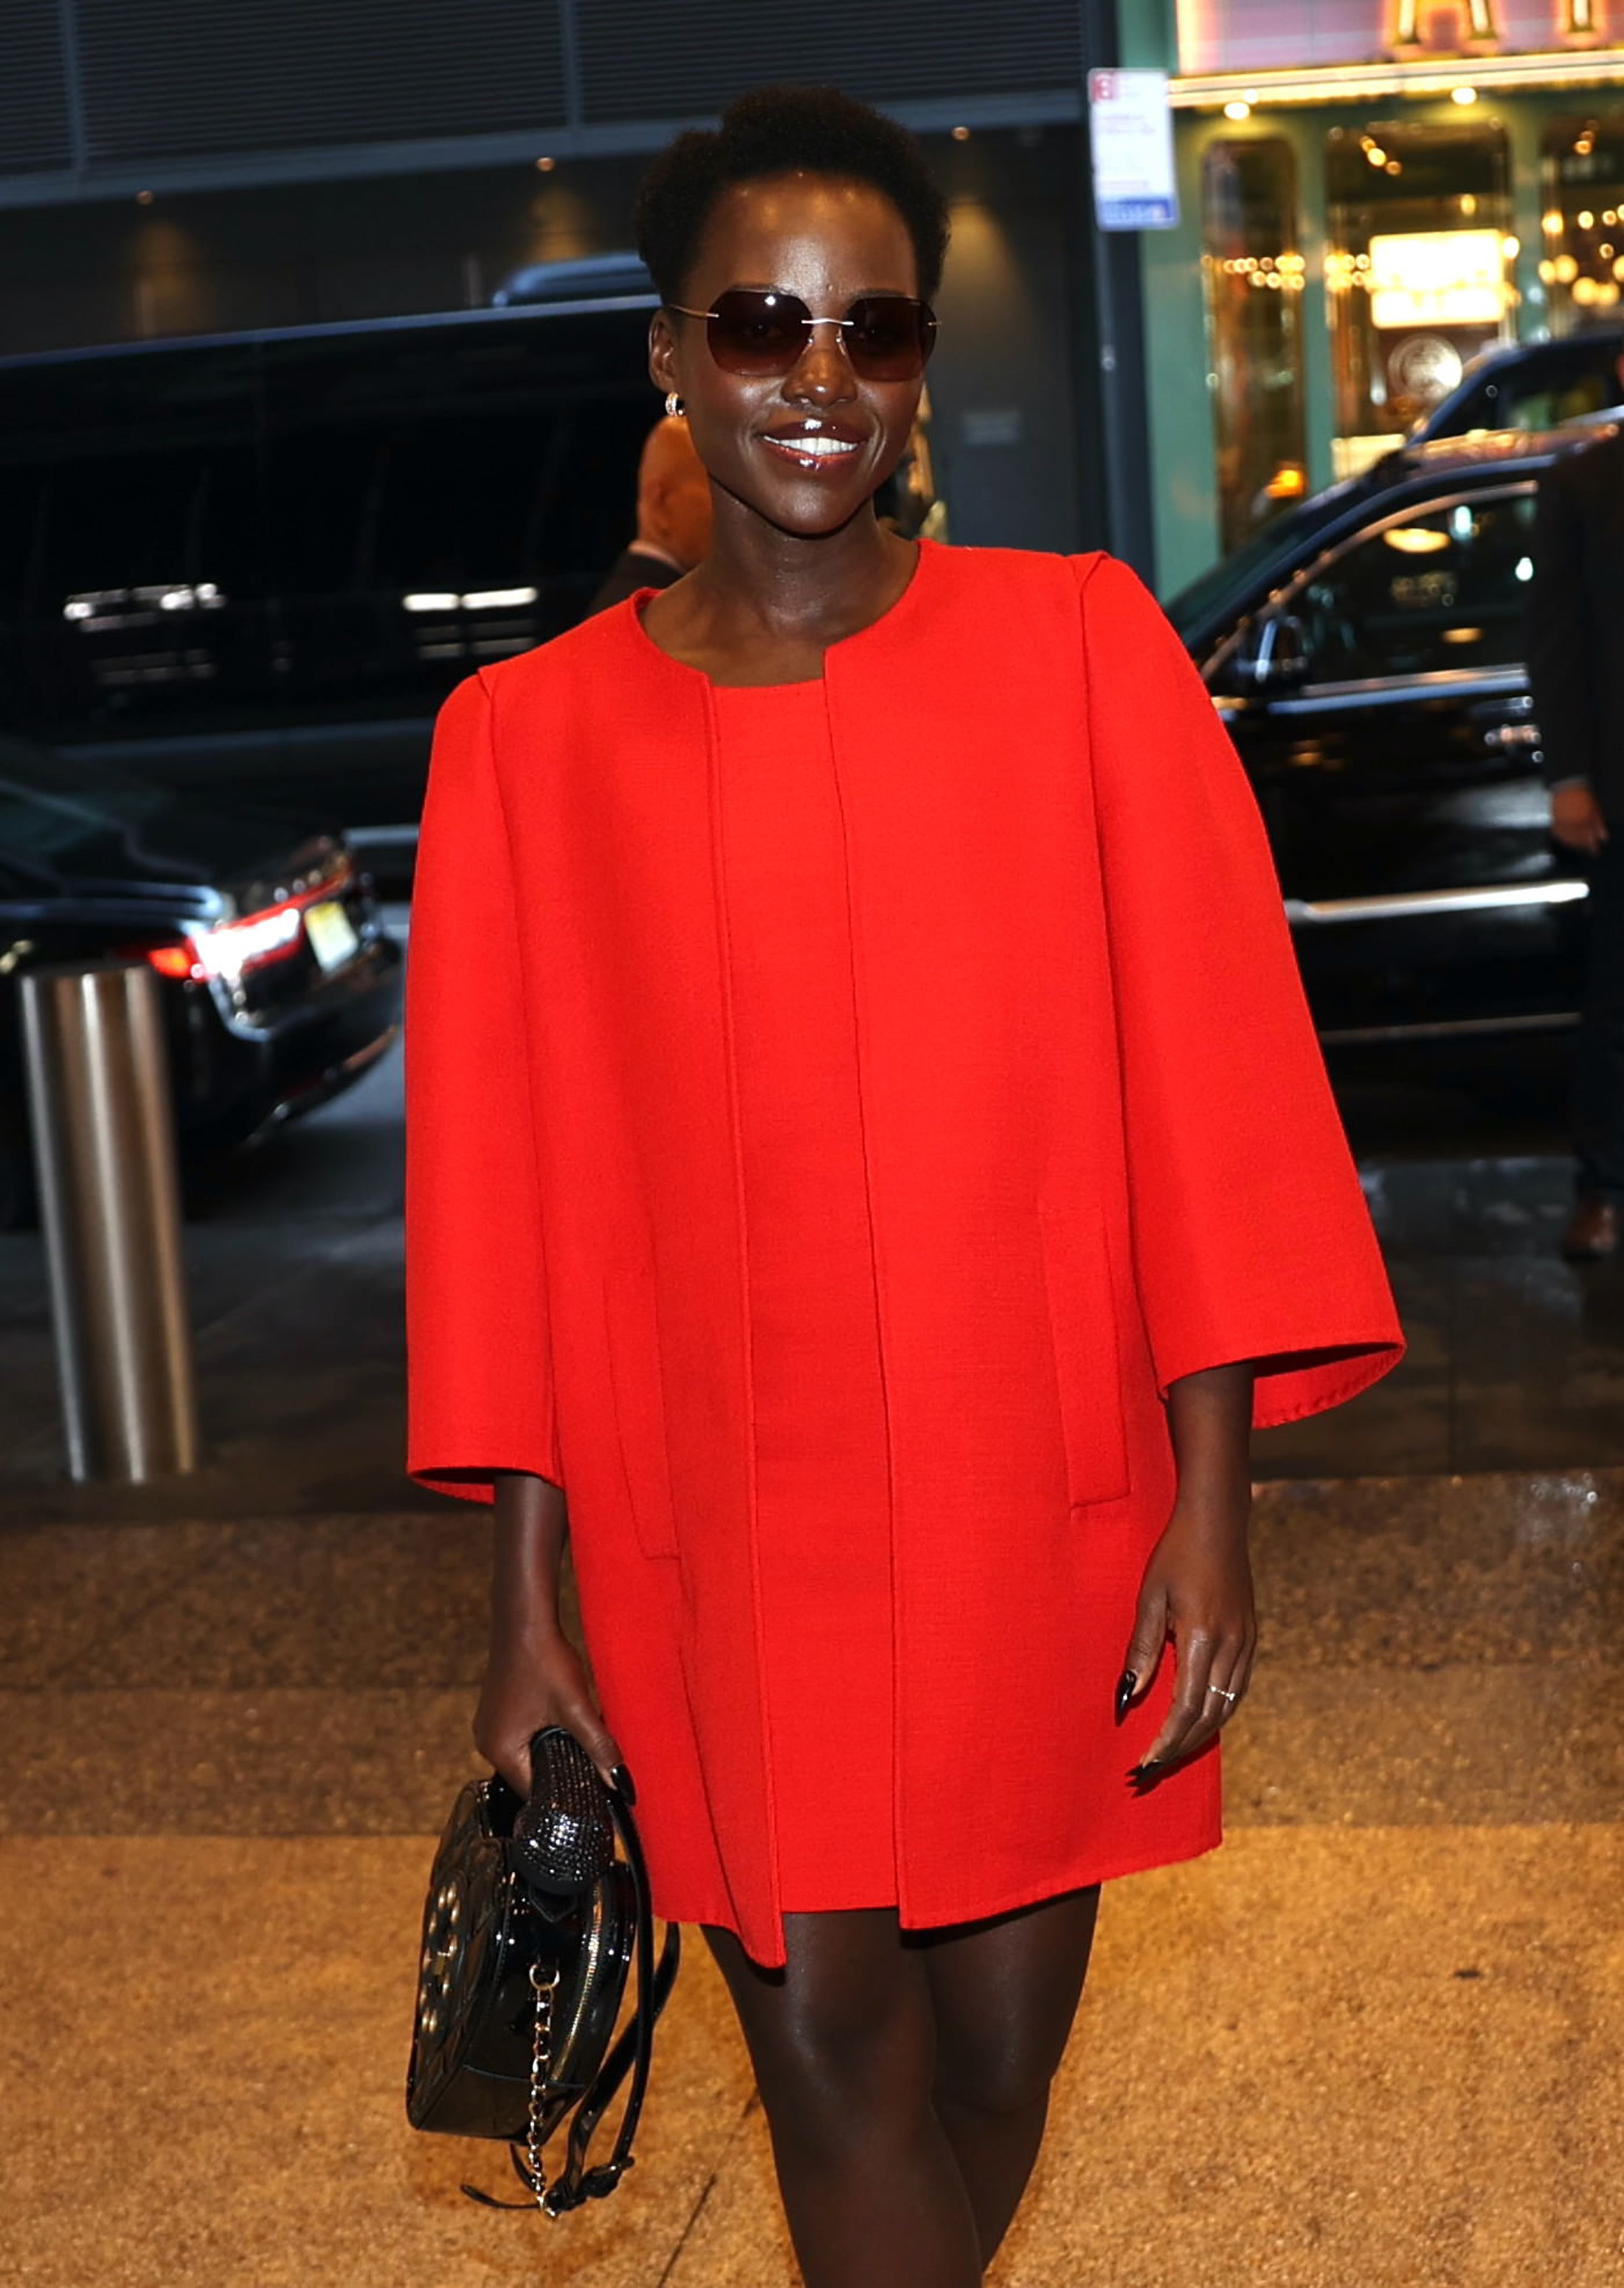 Lupita Nyong&#x27;o is walking in a city at night wearing sunglasses and a stylish knee-length cape dress. She is holding a black handbag and smiling